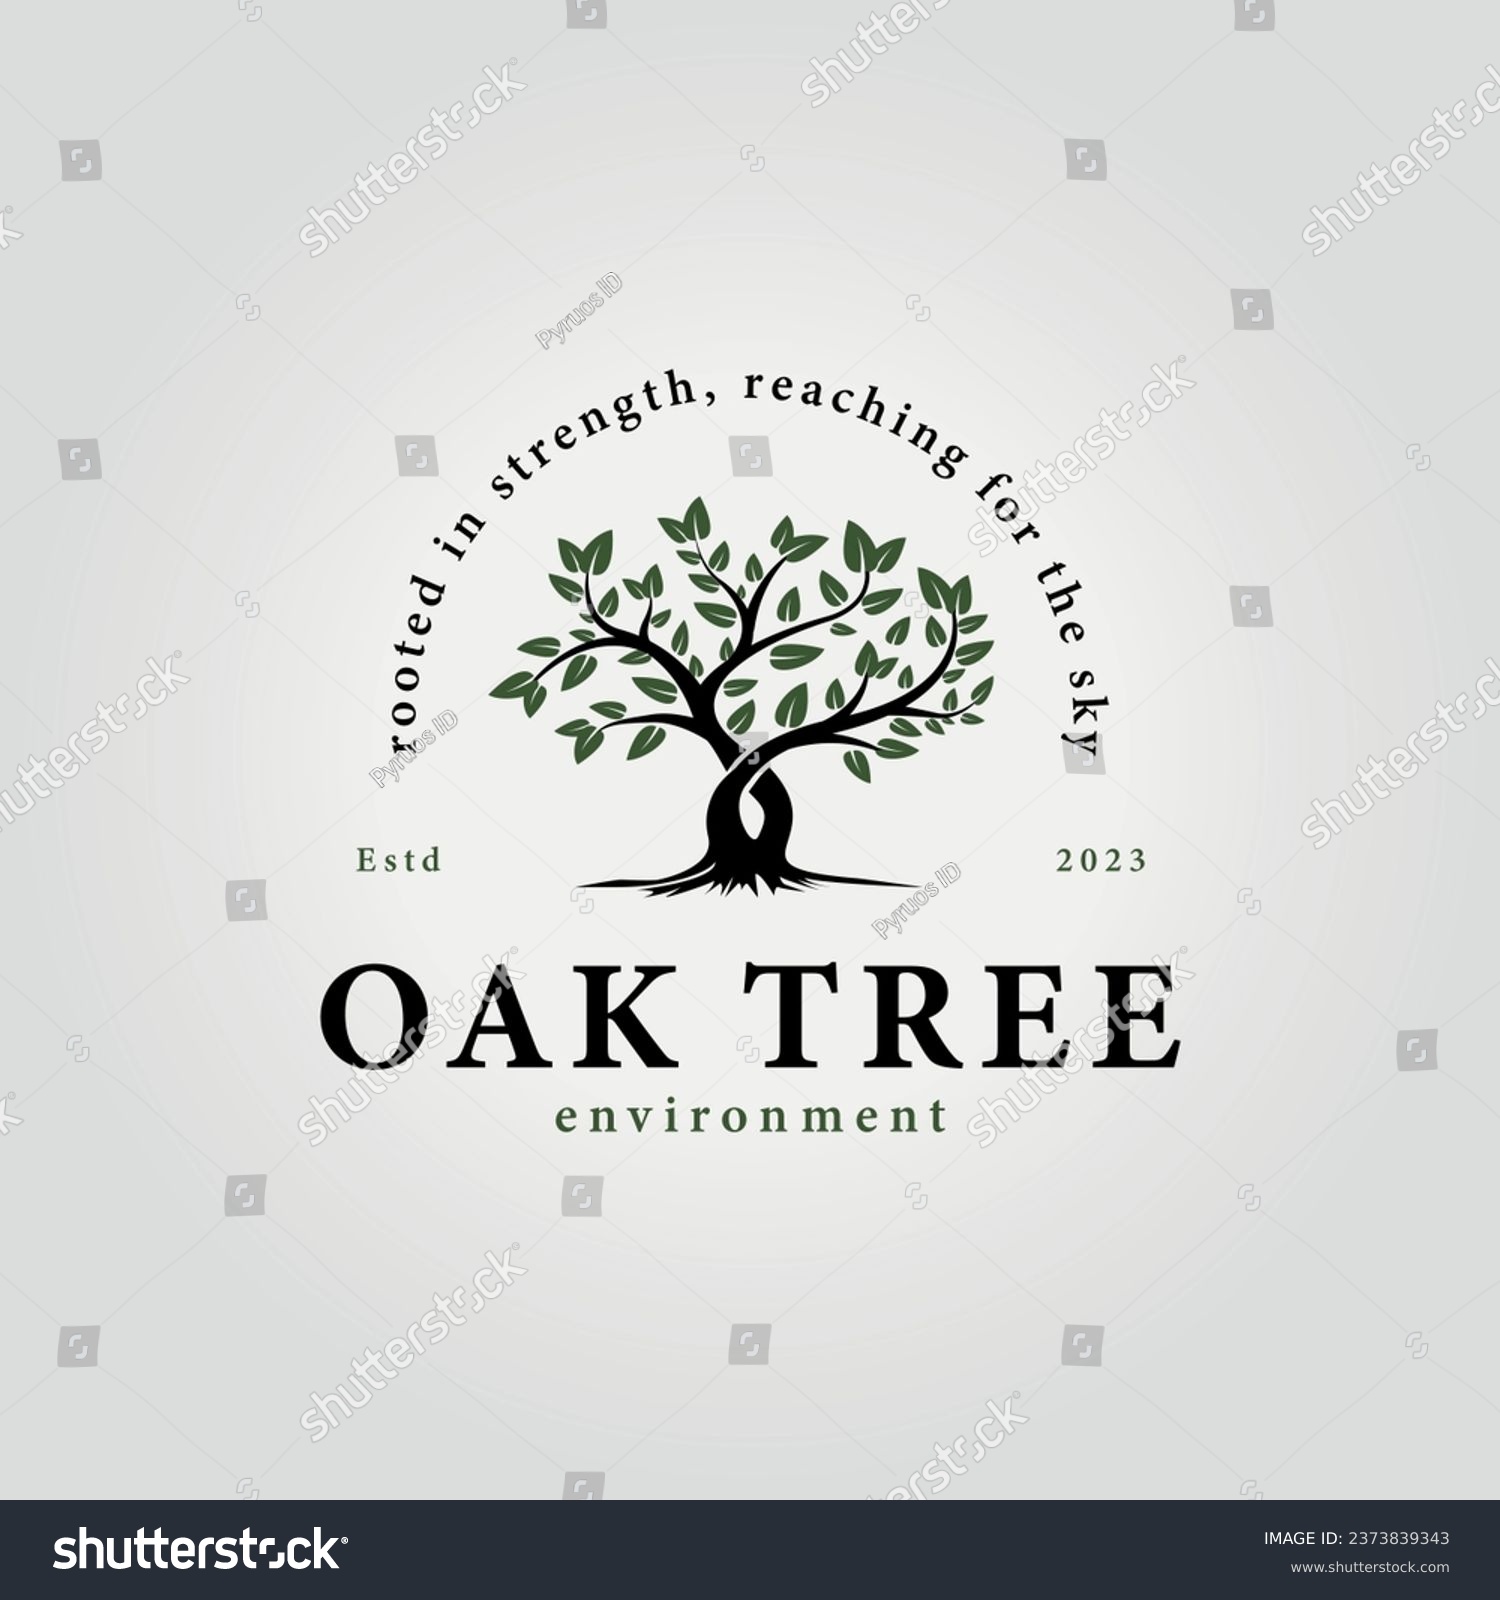 SVG of simple oak tree vector logo, illustration design of acacia and banyan tree icons in summer svg